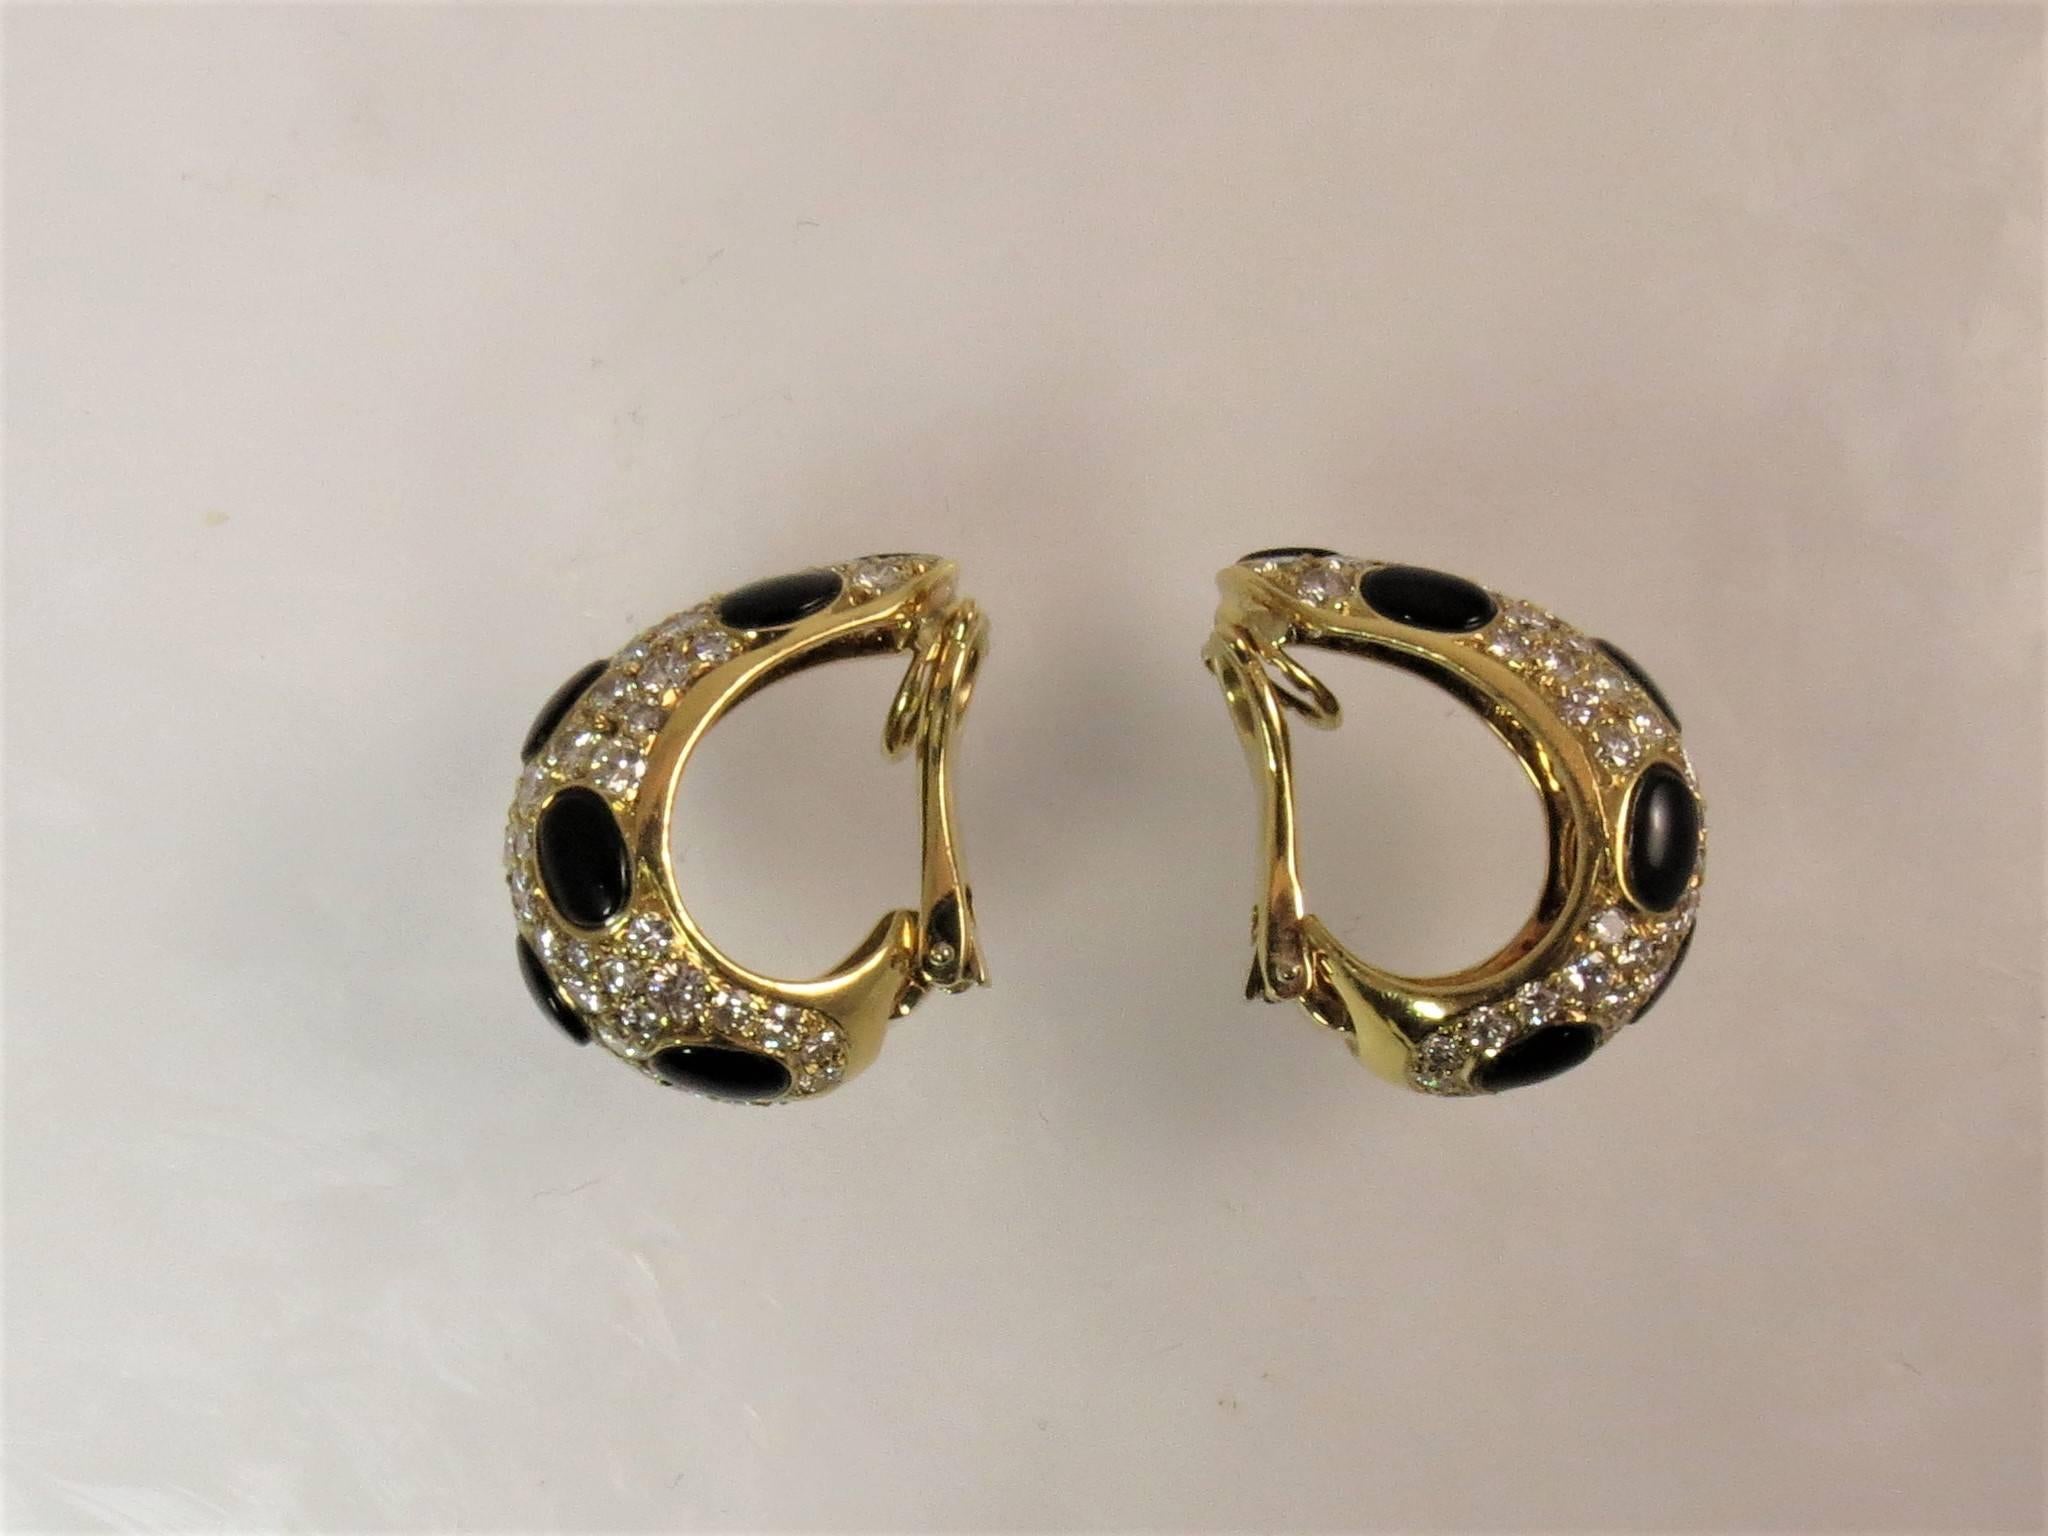 18K yellow gold ear clips set with145 full cut round diamonds weighing 5.48cts F-G color, VS clarity, and 18 cabochon black onyx sections.